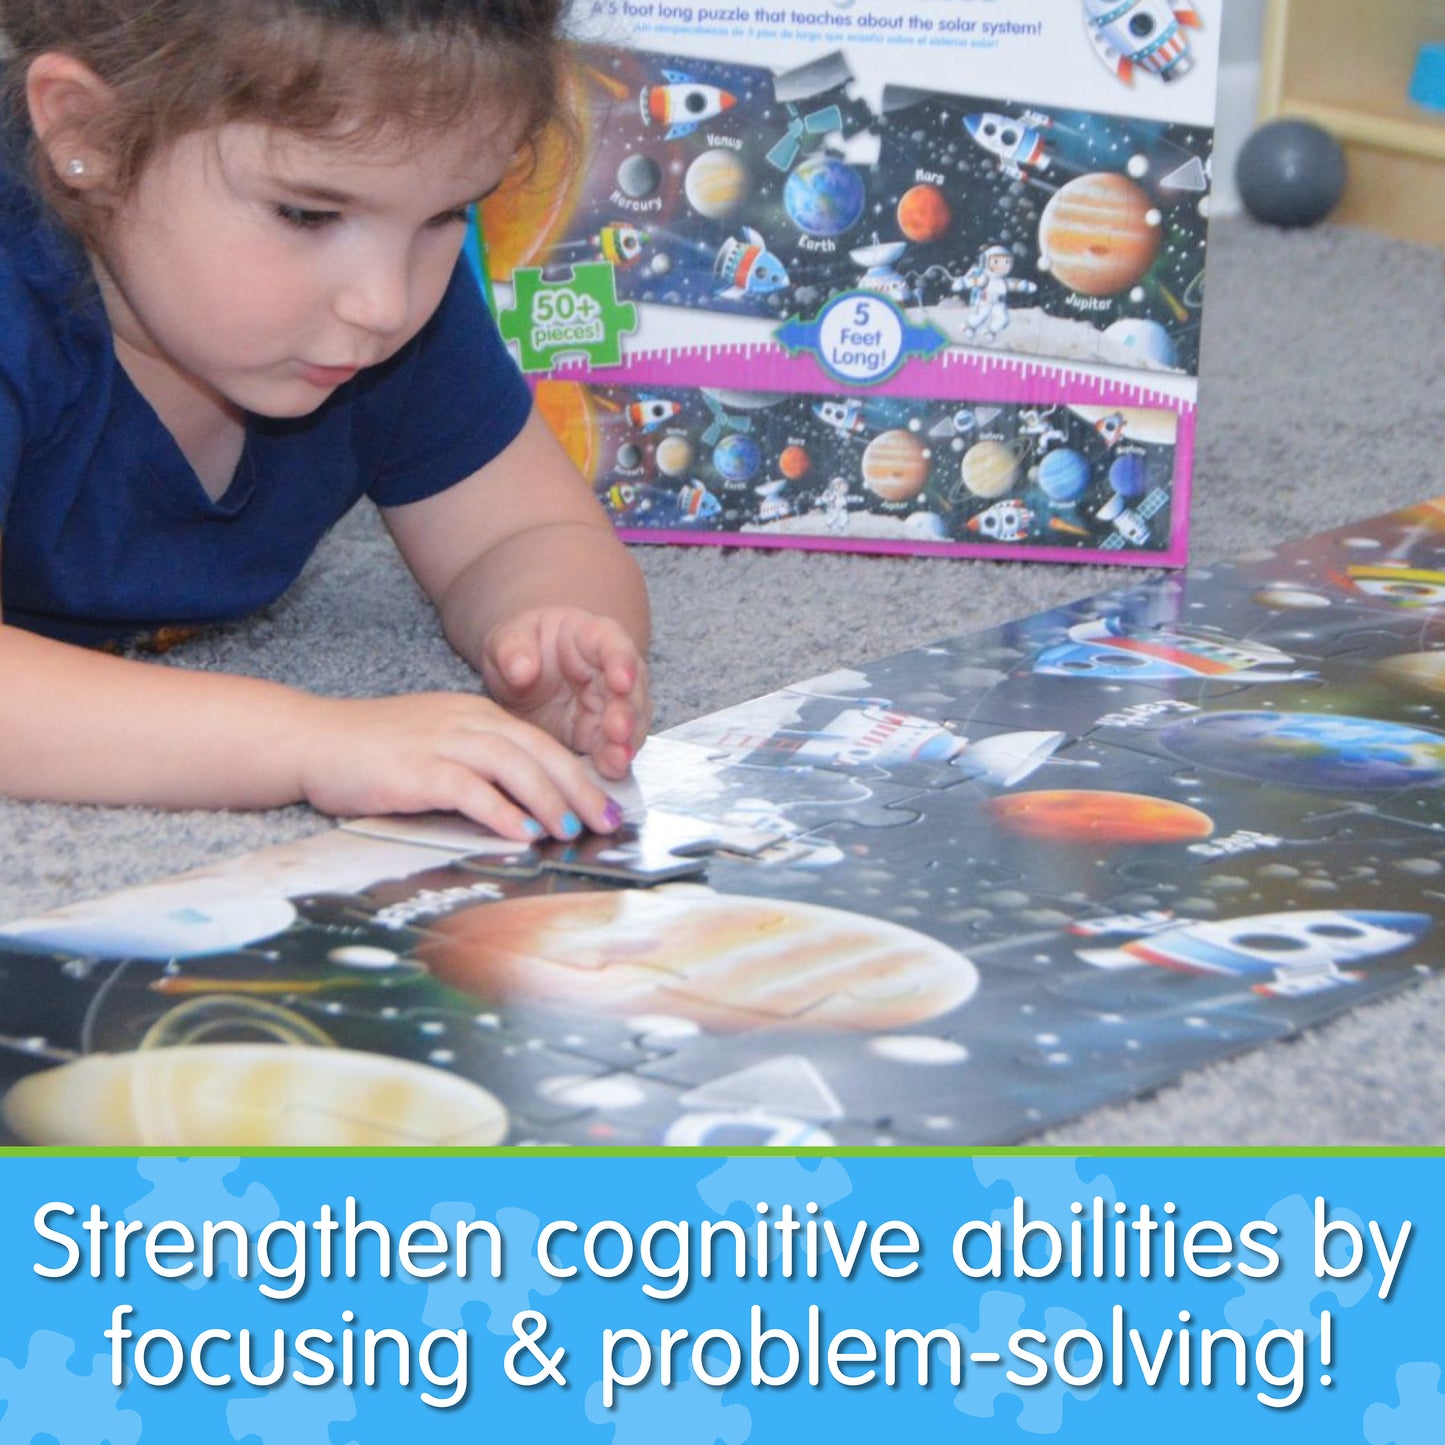 Infographic of little girl assembling Long and Tall Solar System Puzzle that says, "Strengthen cognitive abilities by focusing and problem-solving!"